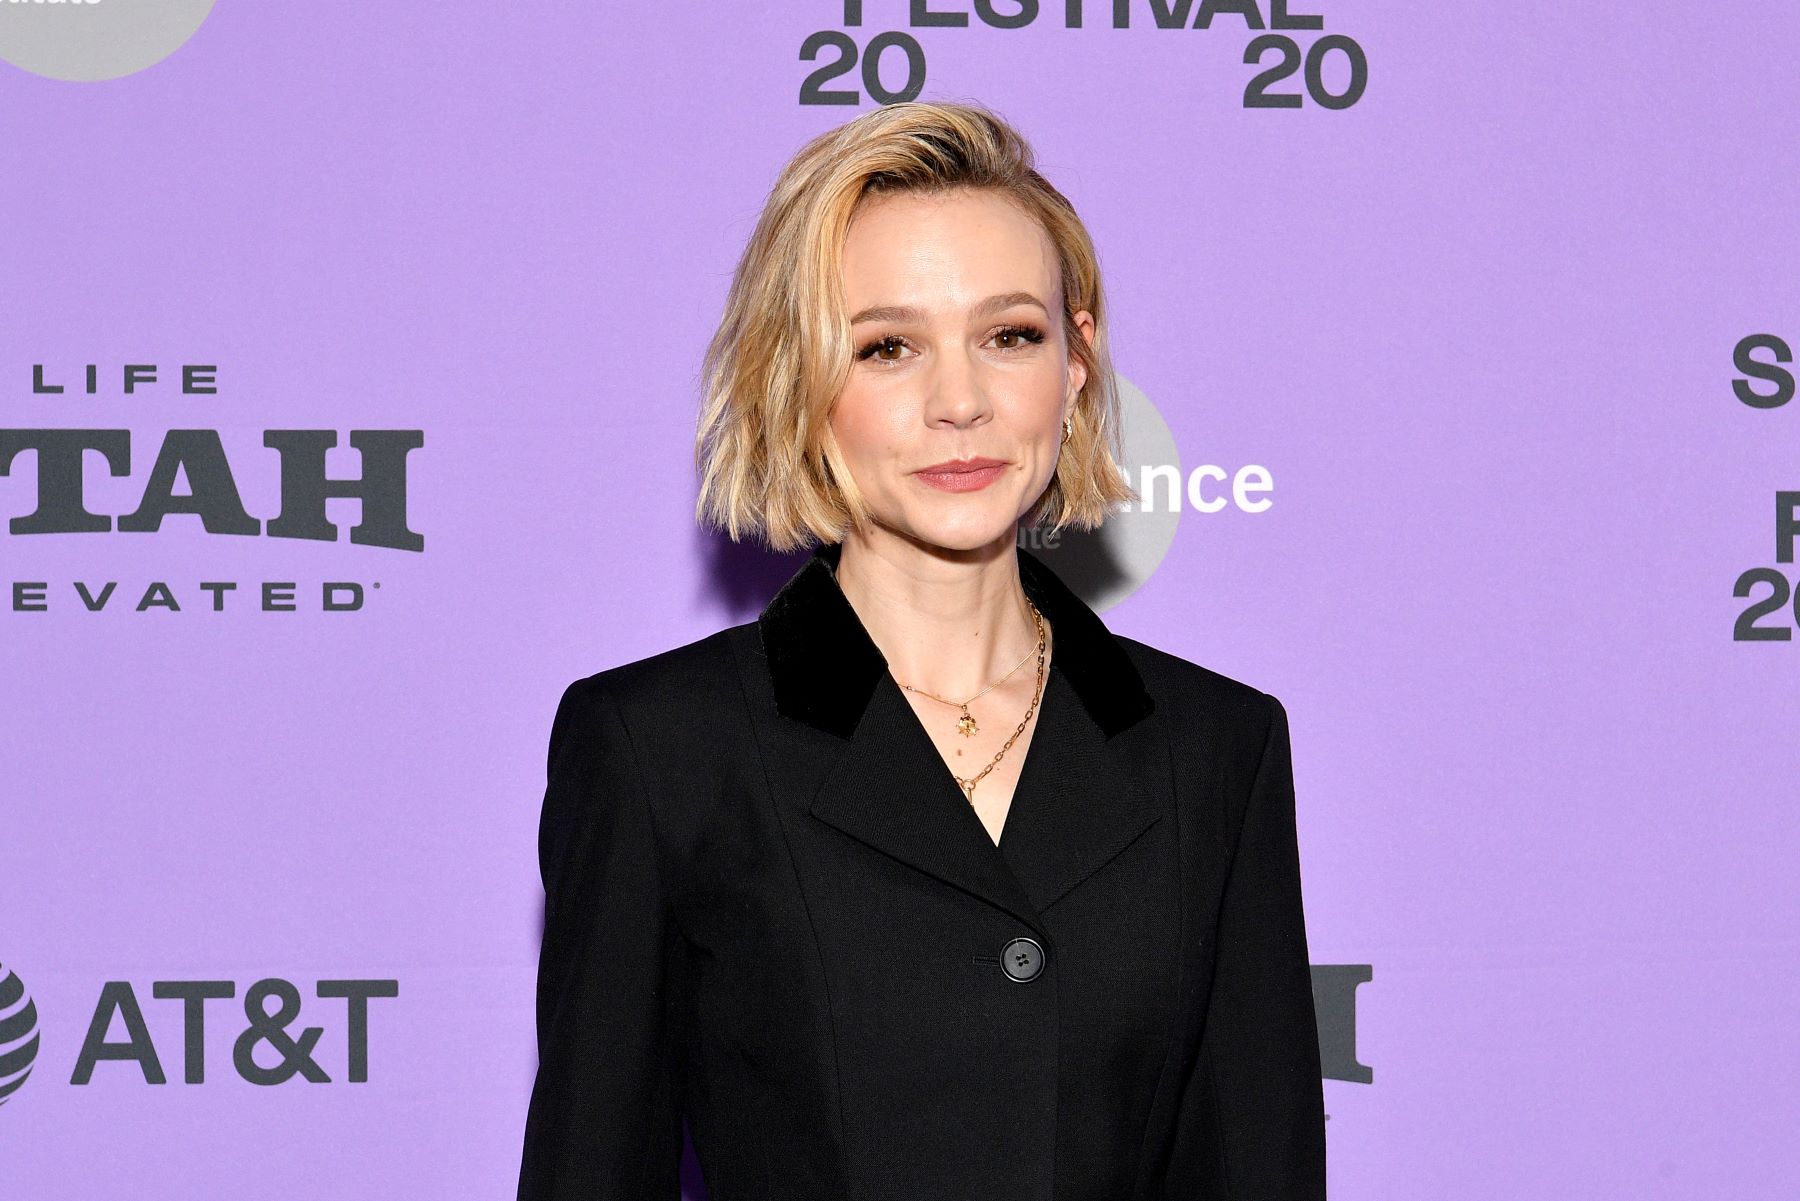 Carey Mulligan at the 2020 Sundance Film Festival in Park City, Utah, for 'Promising Young Woman'